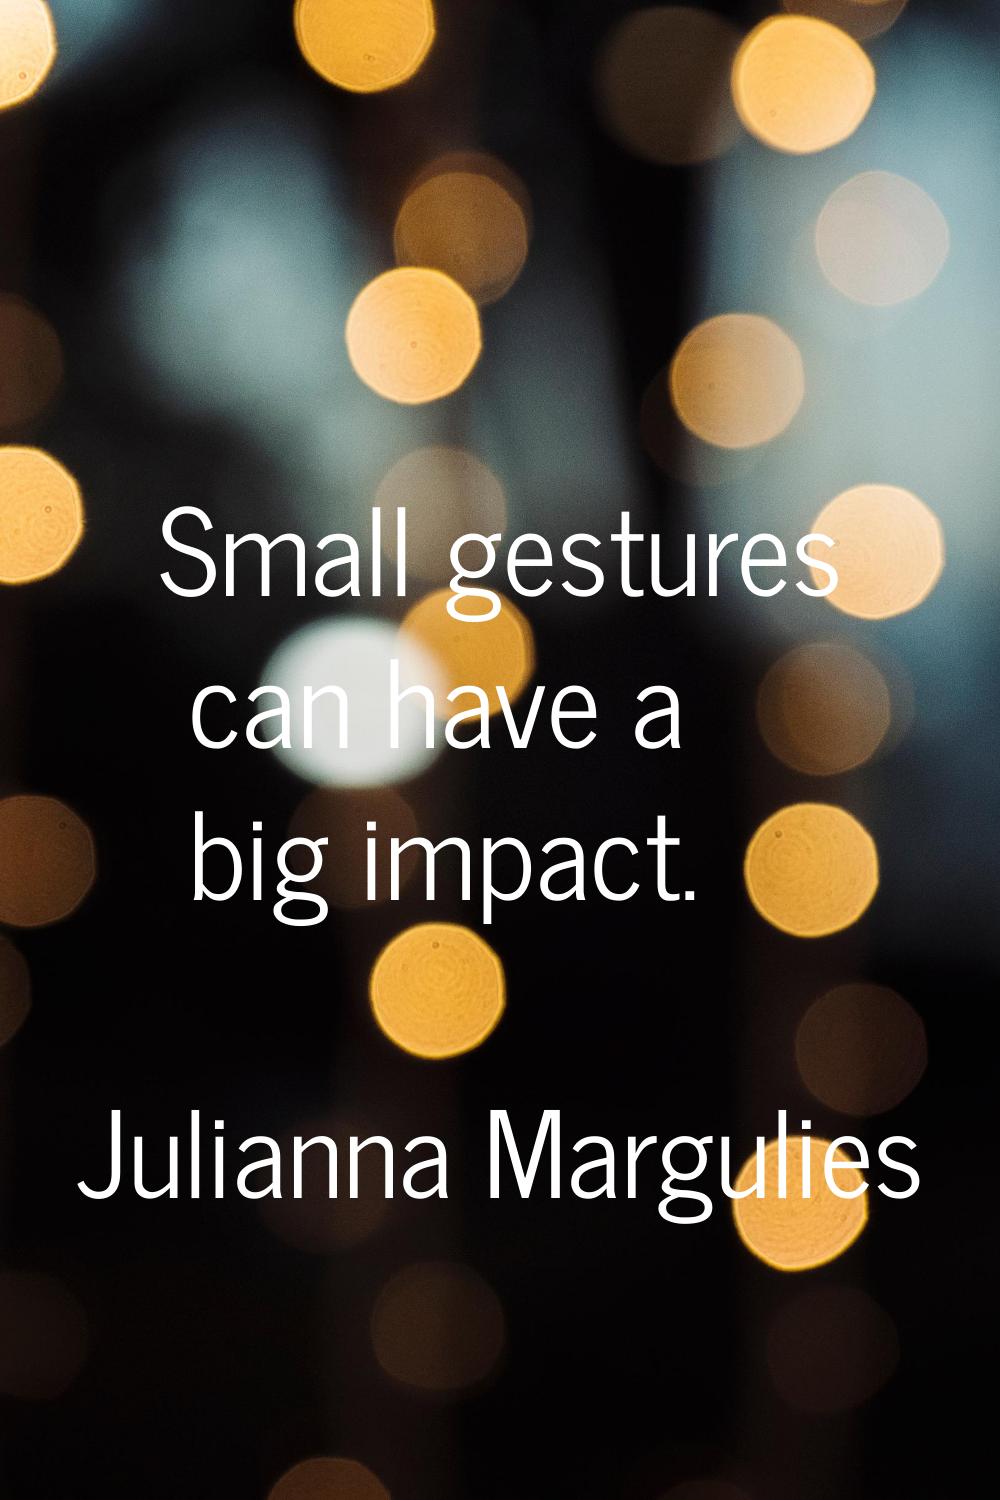 Small gestures can have a big impact.